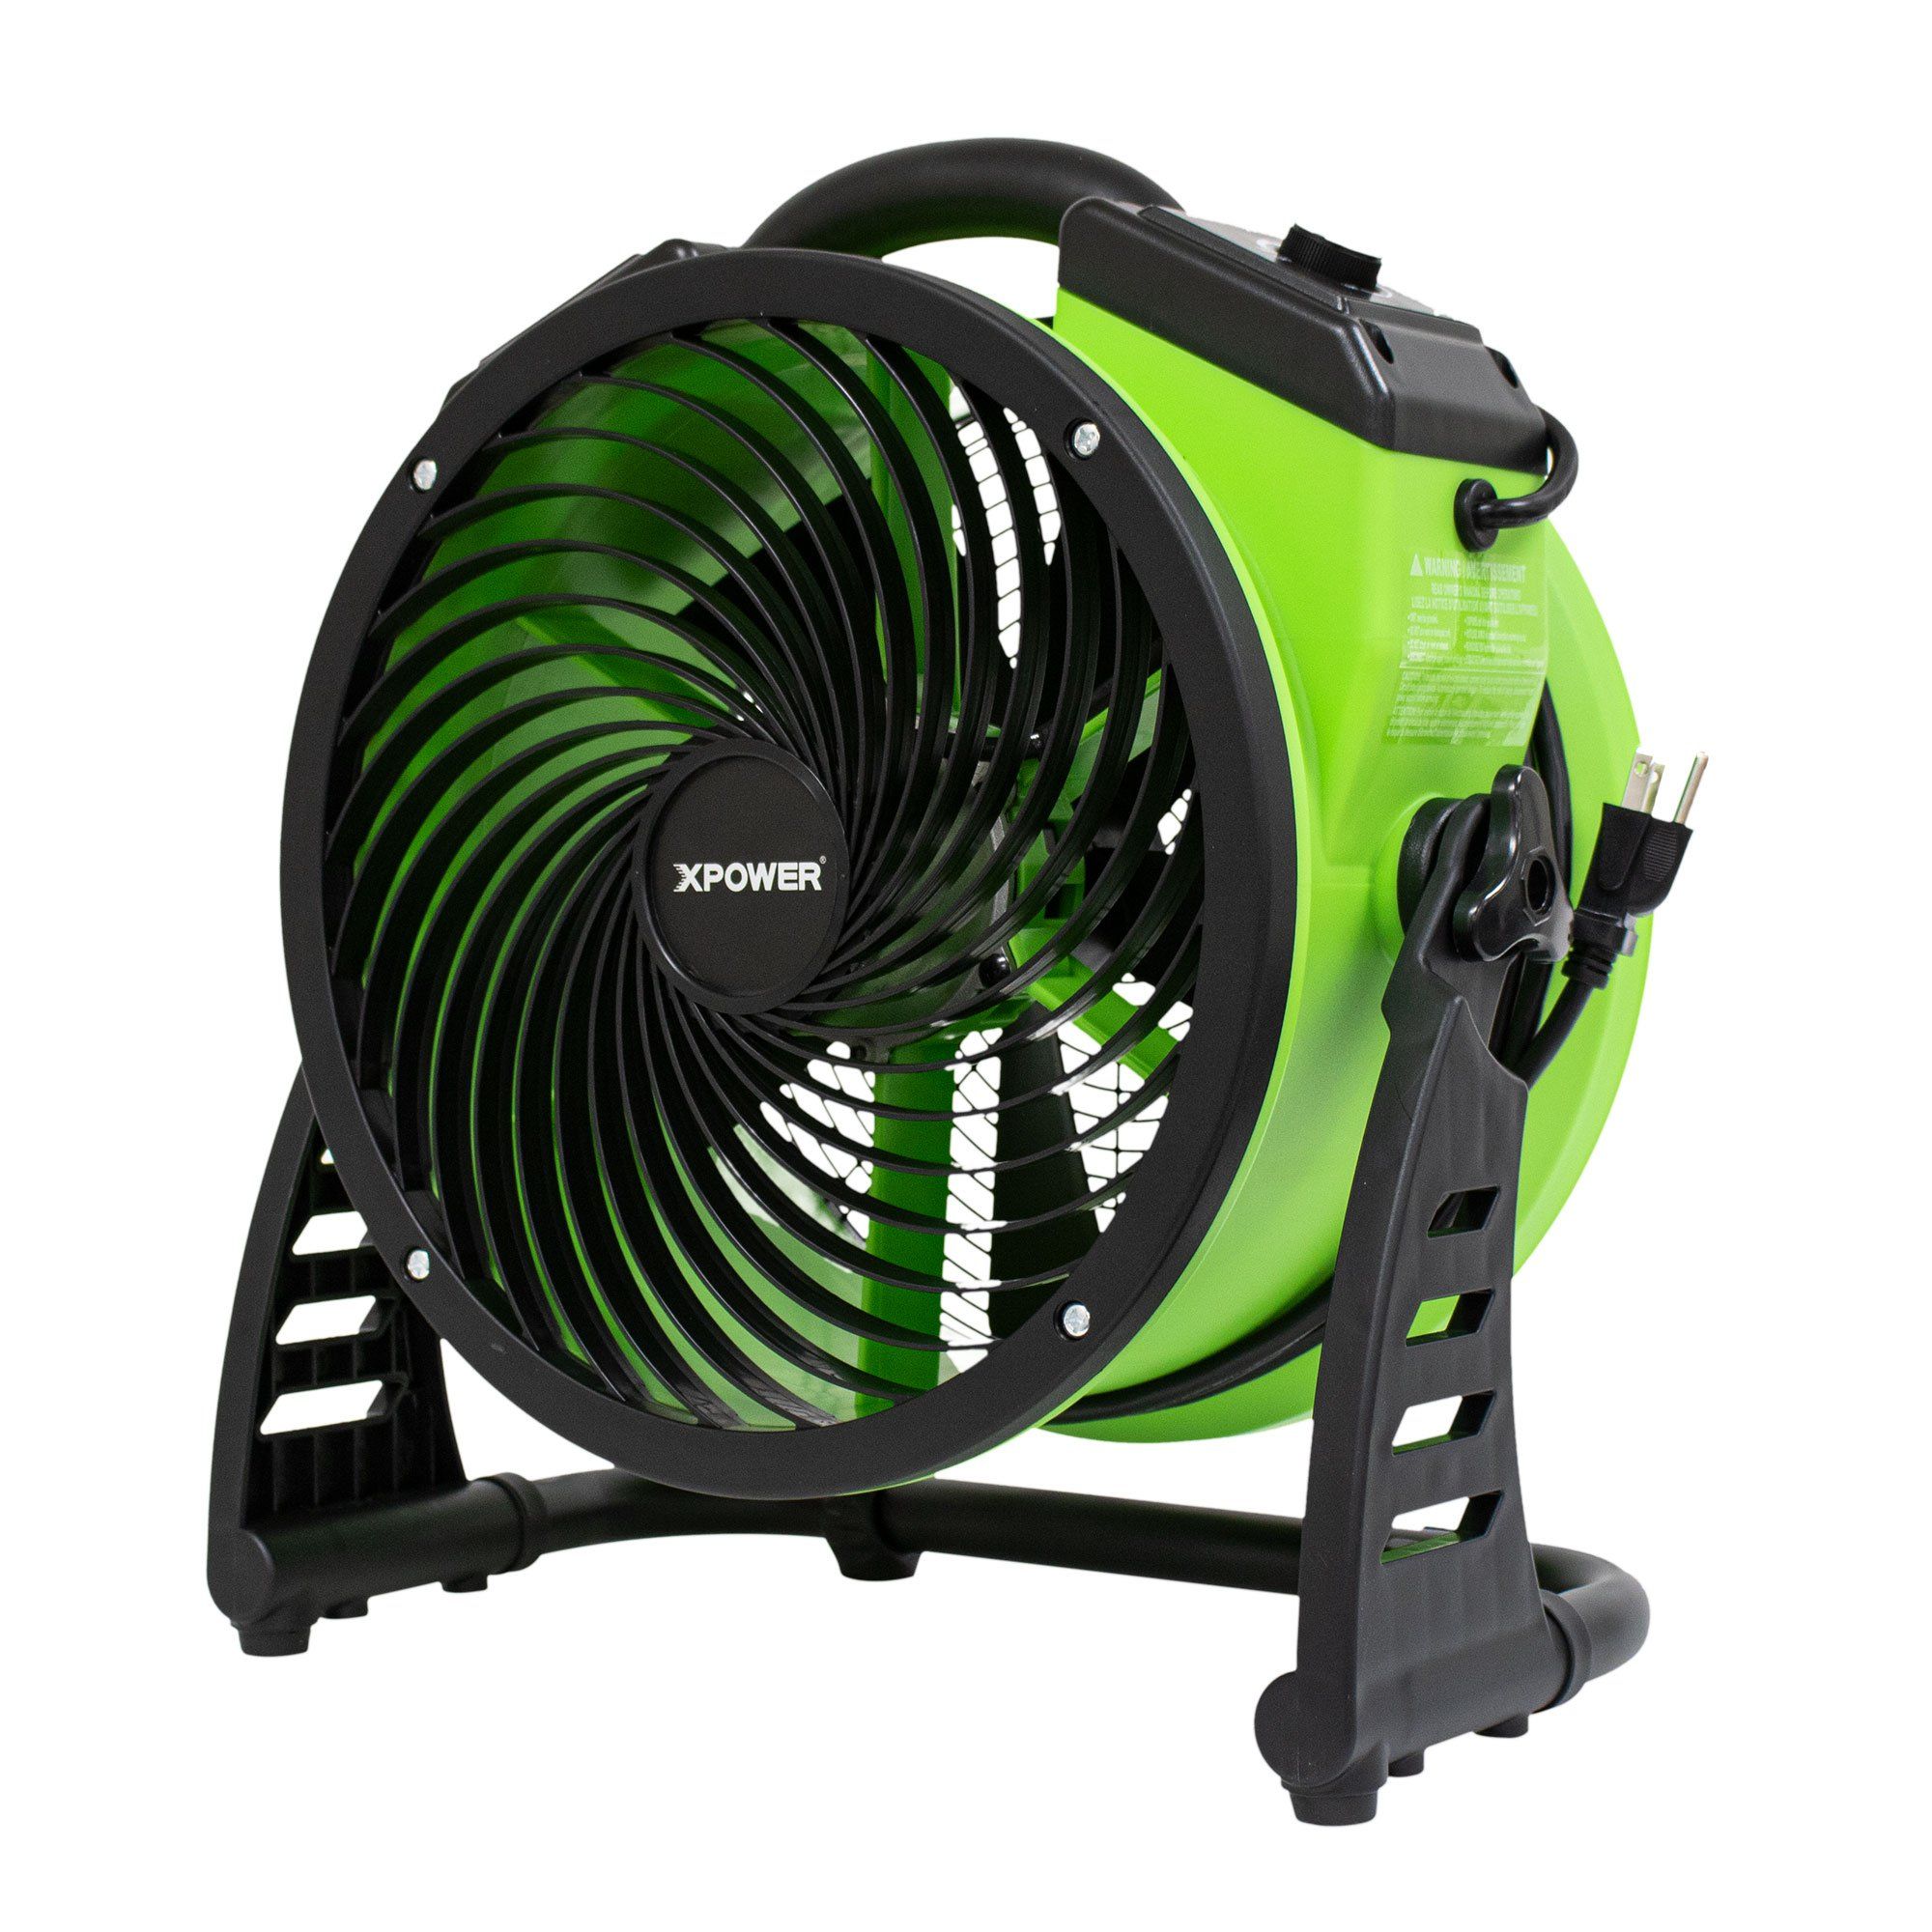 XPOWER FC-250D Pro 13” Brushless DC Motor Air Circulator Utility Fan with Timer